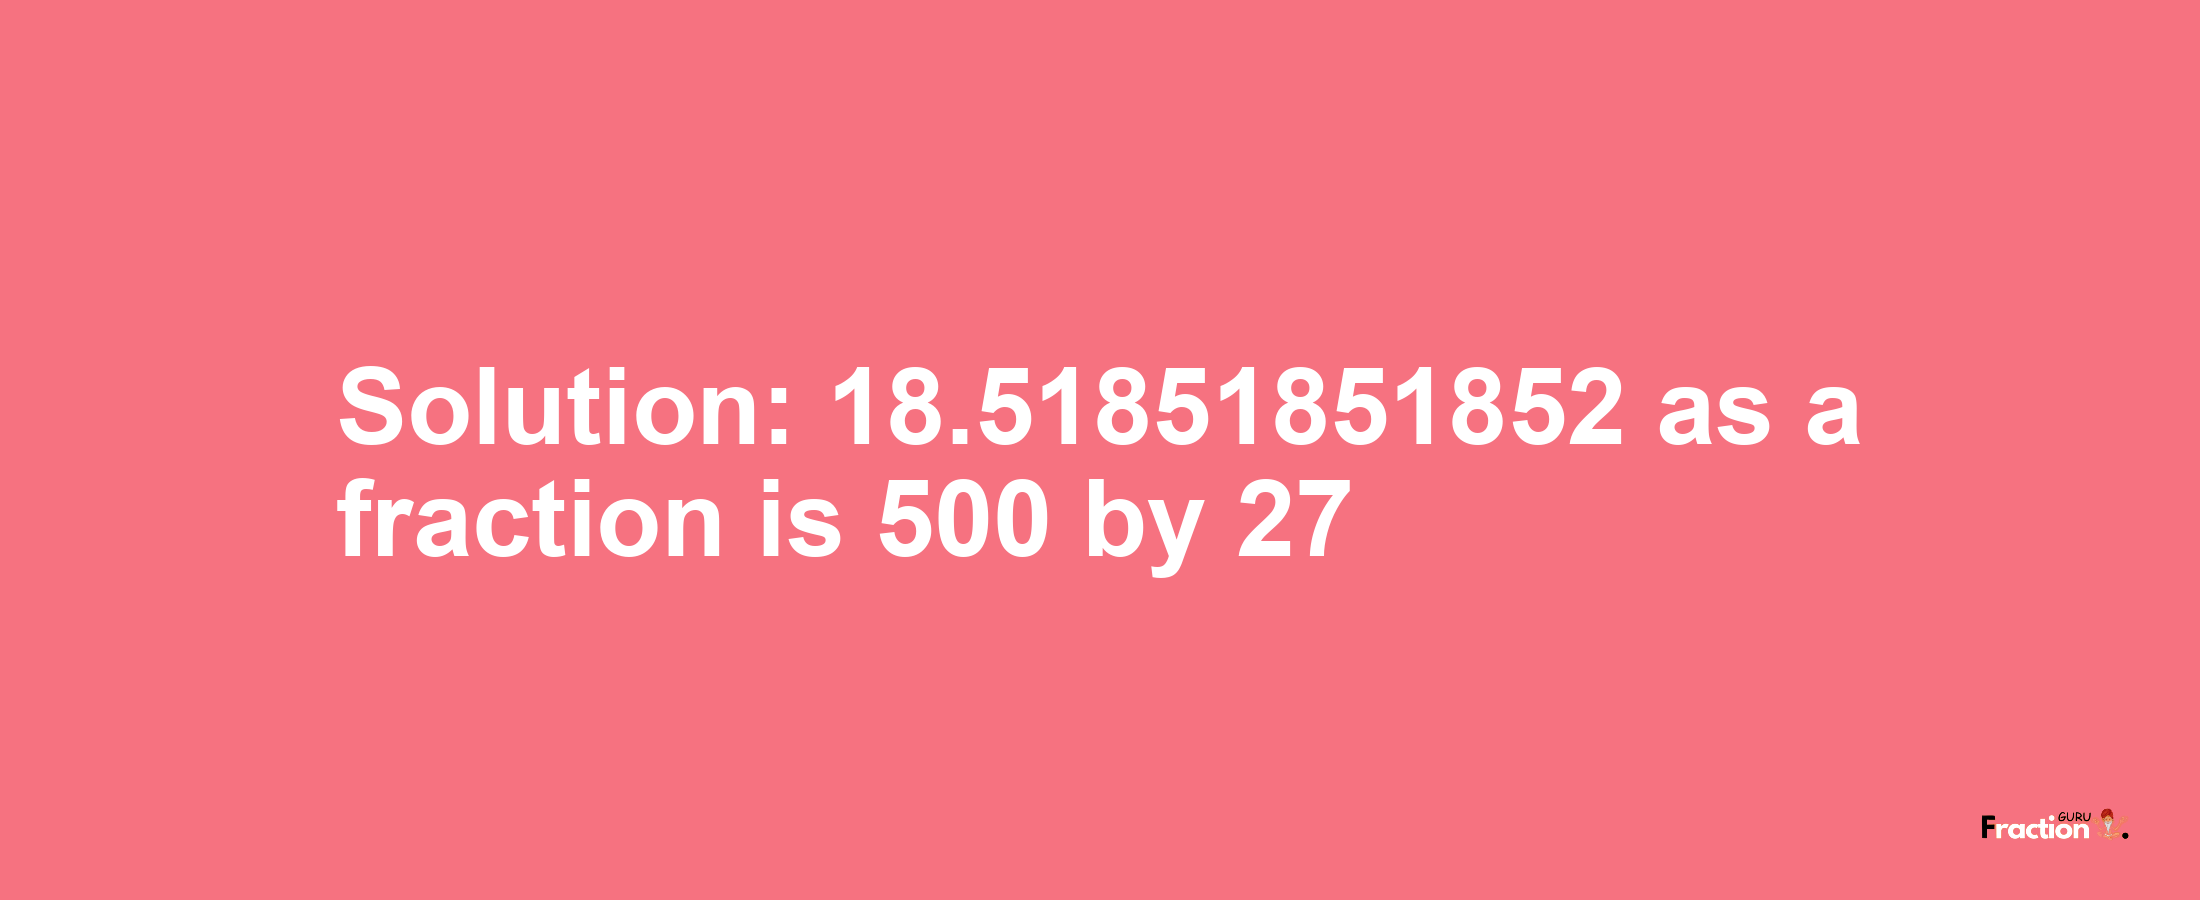 Solution:18.51851851852 as a fraction is 500/27